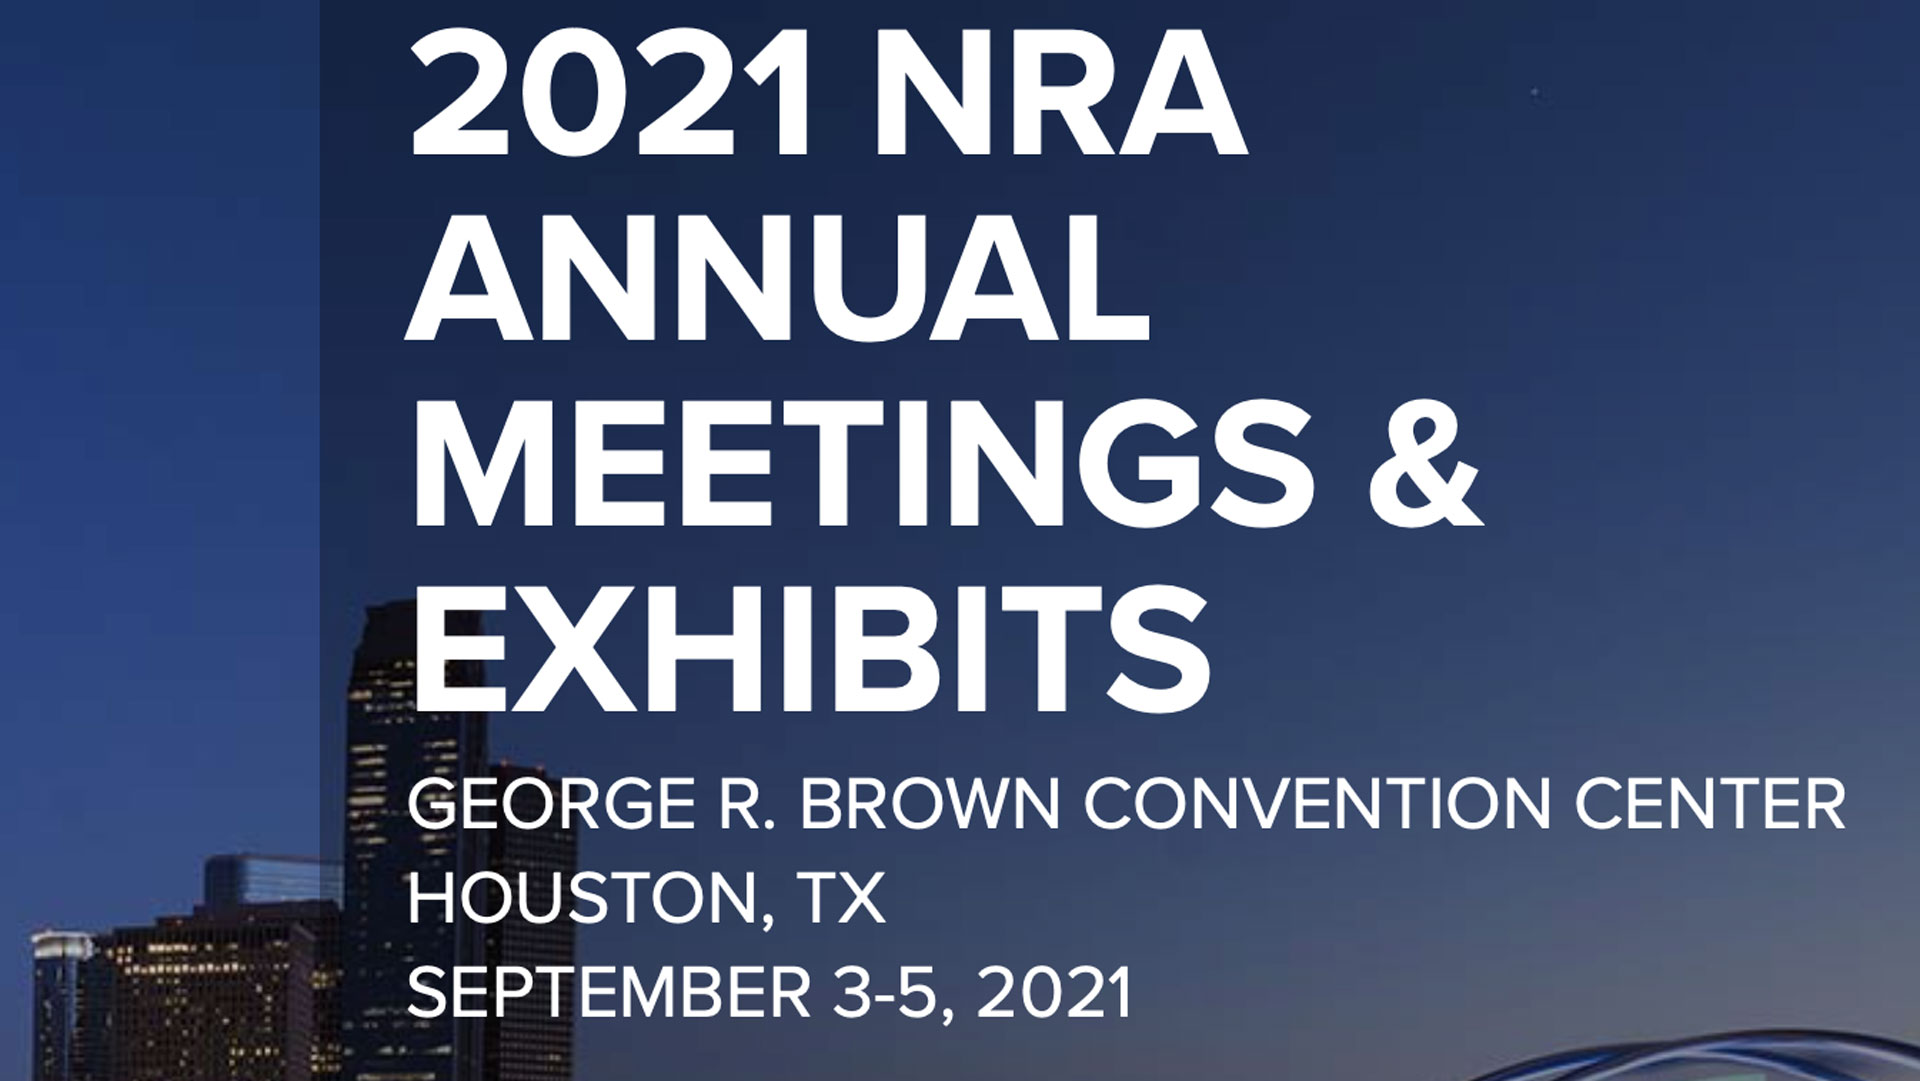 NRA Women NRA Announces New Dates For 150th Annual Meetings & Exhibits